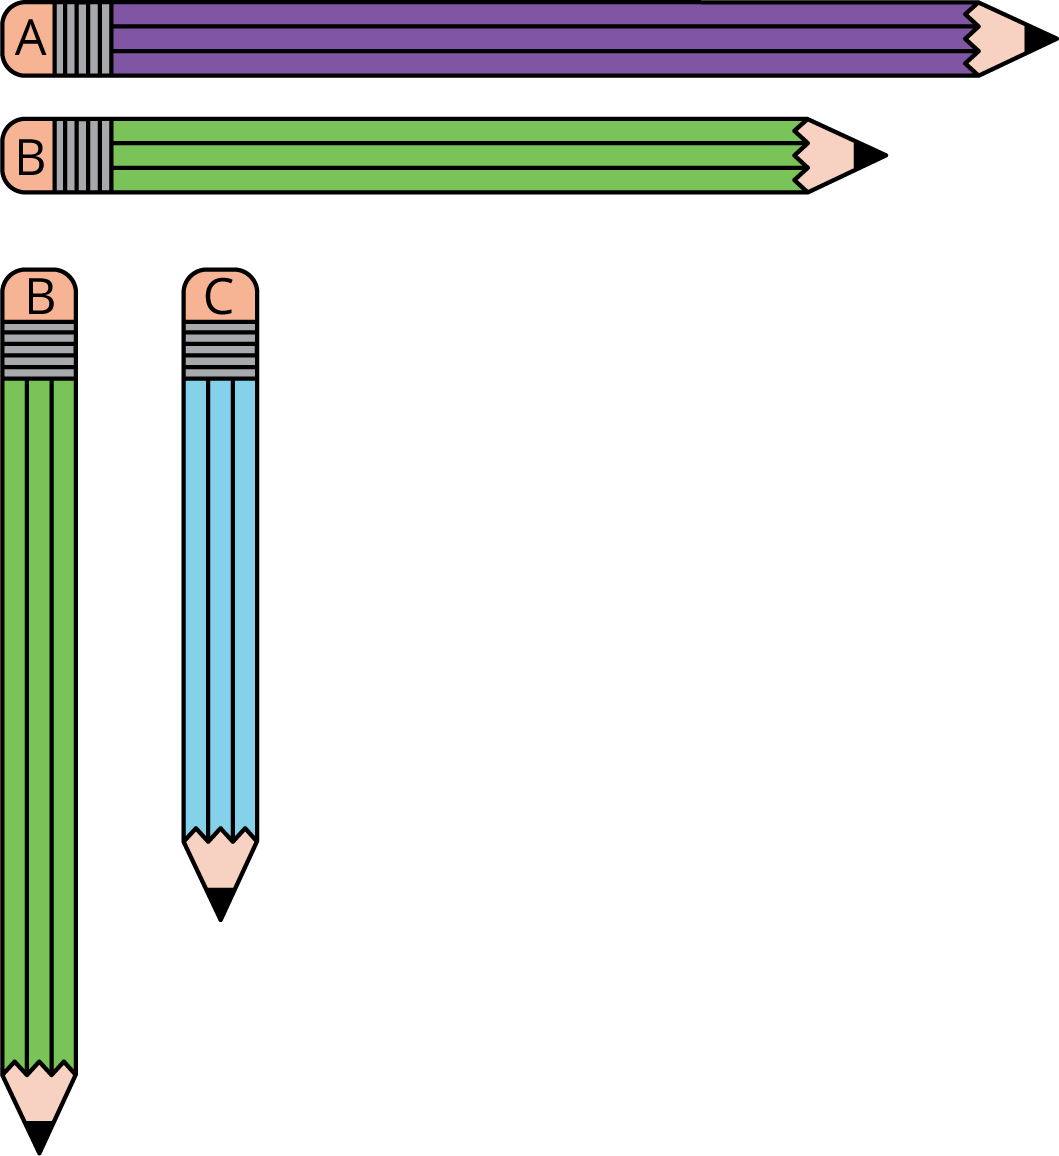 Pencils in 2 groups. For each group, 2 pencils are lined up at erasers but not at the pencil point.